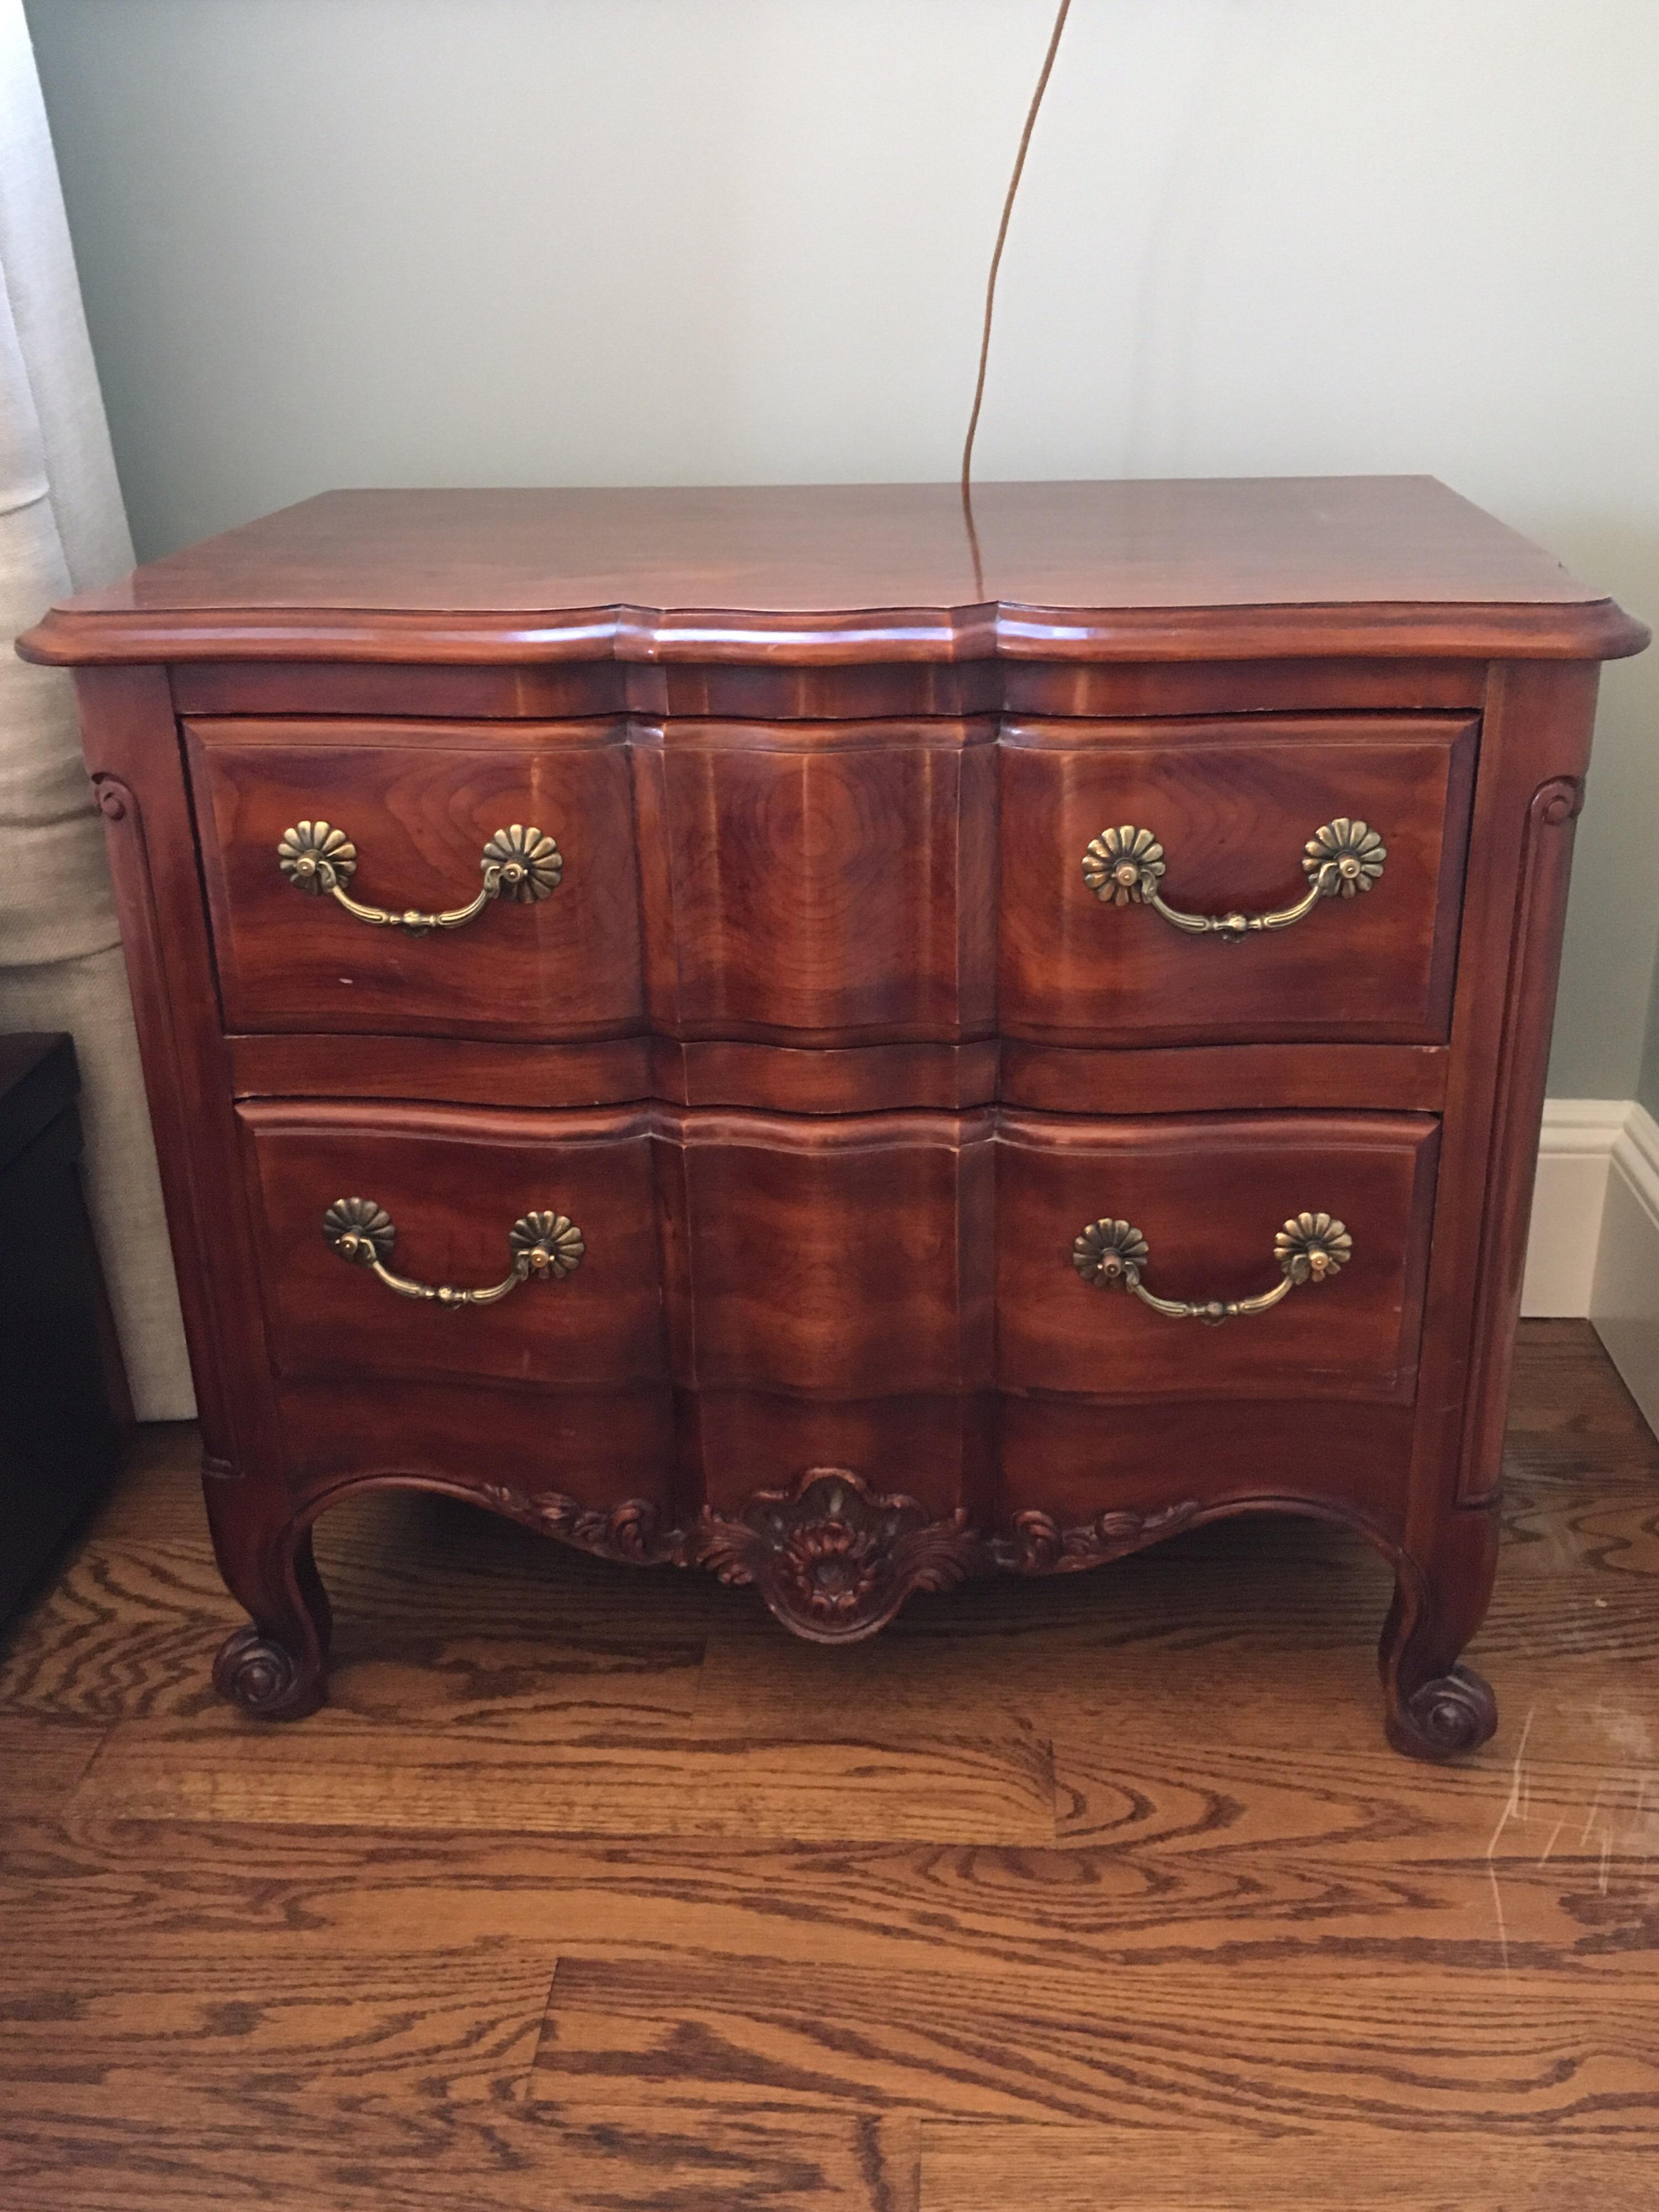 Pair of French Provincial style bedside tables by John Widdicomb.
Two drawers on each 22.5